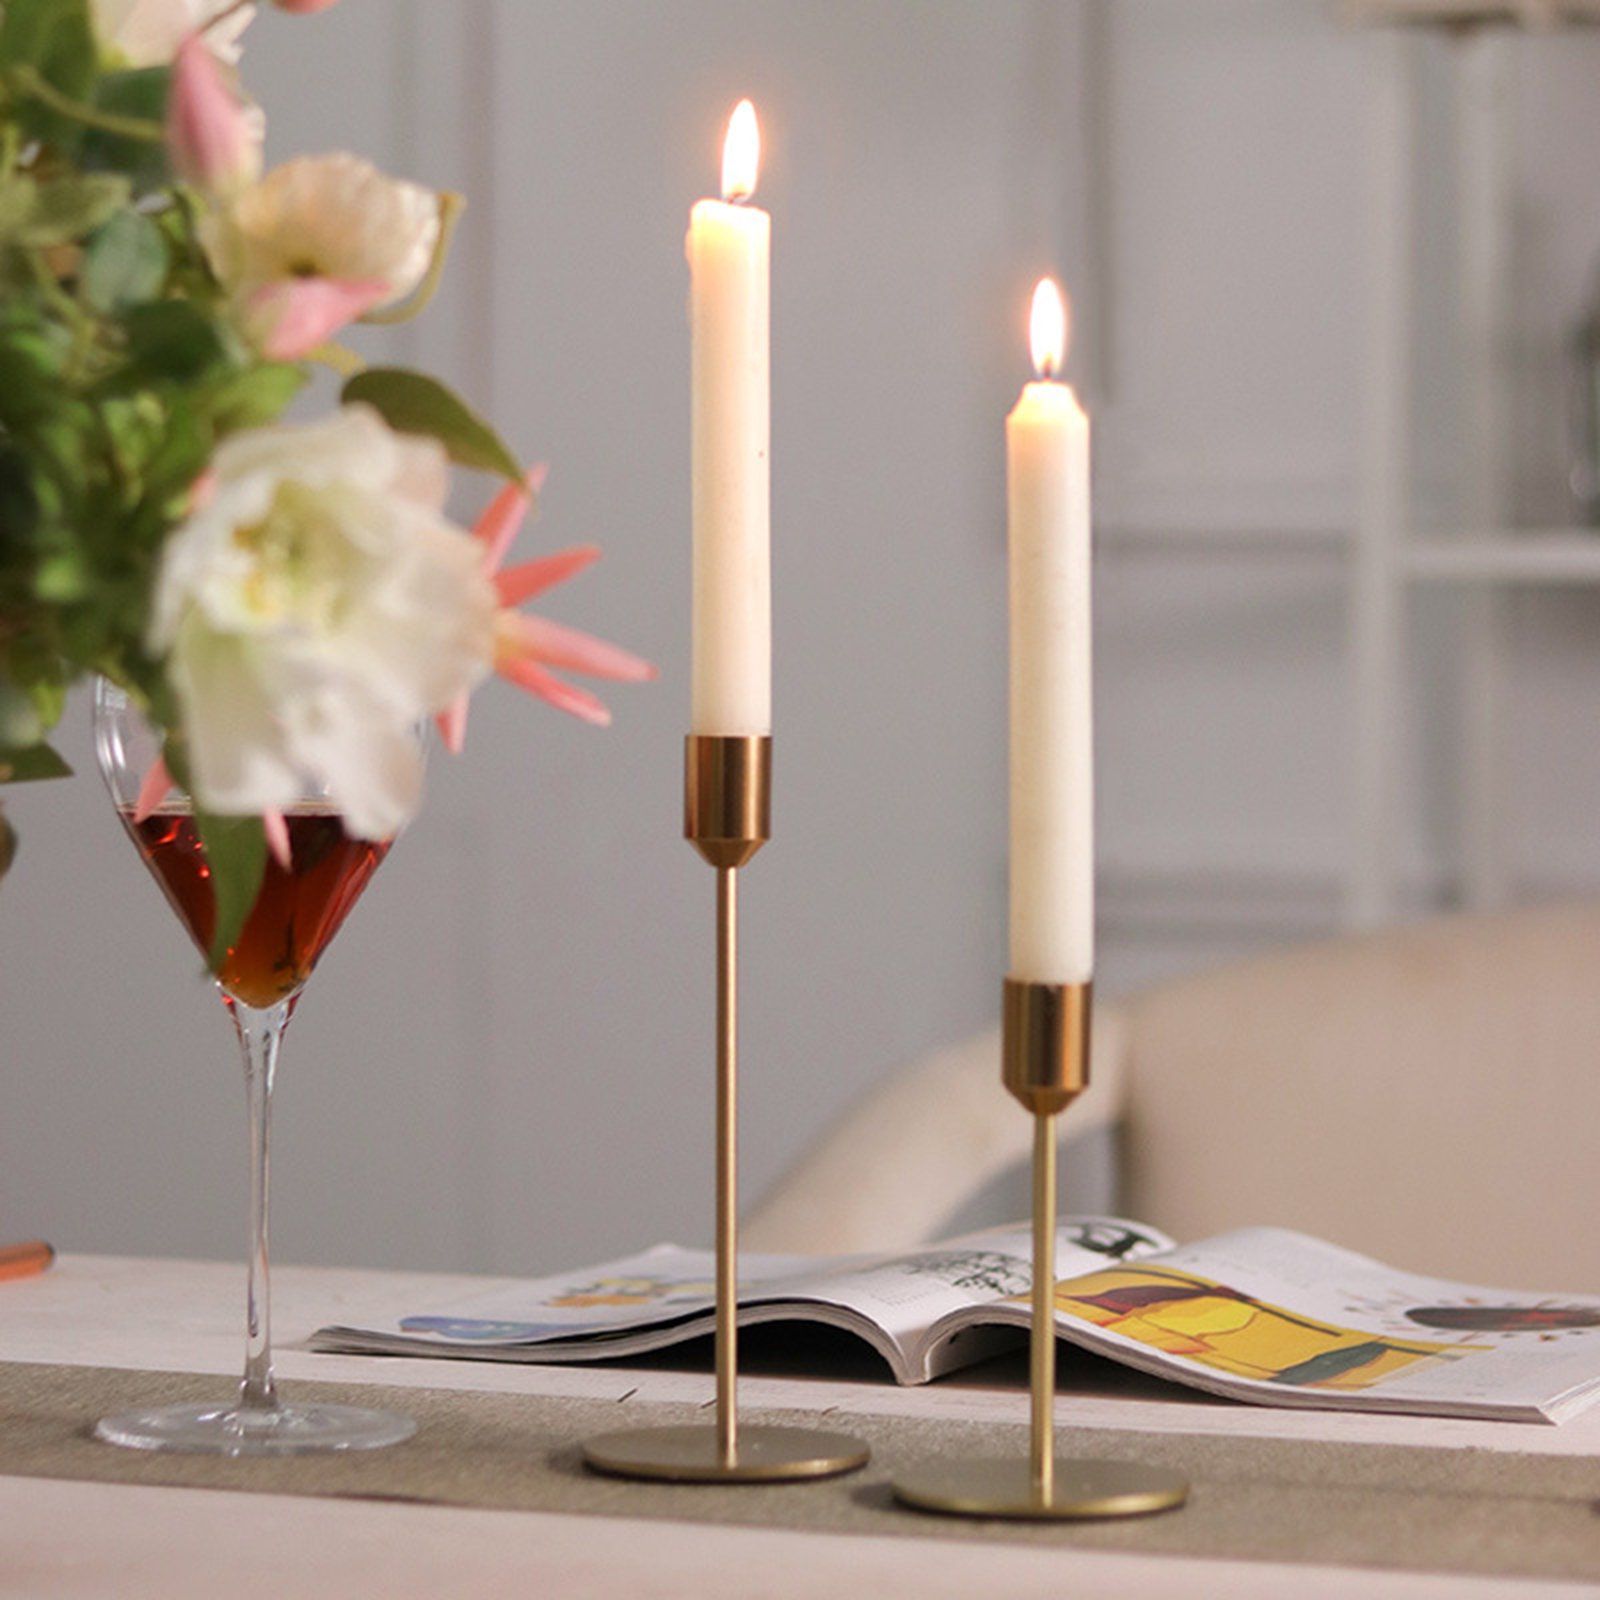 Gold Metal Candlestick Holders, Taper Candle Holders Decorative Candle Stand | Walmart (US)